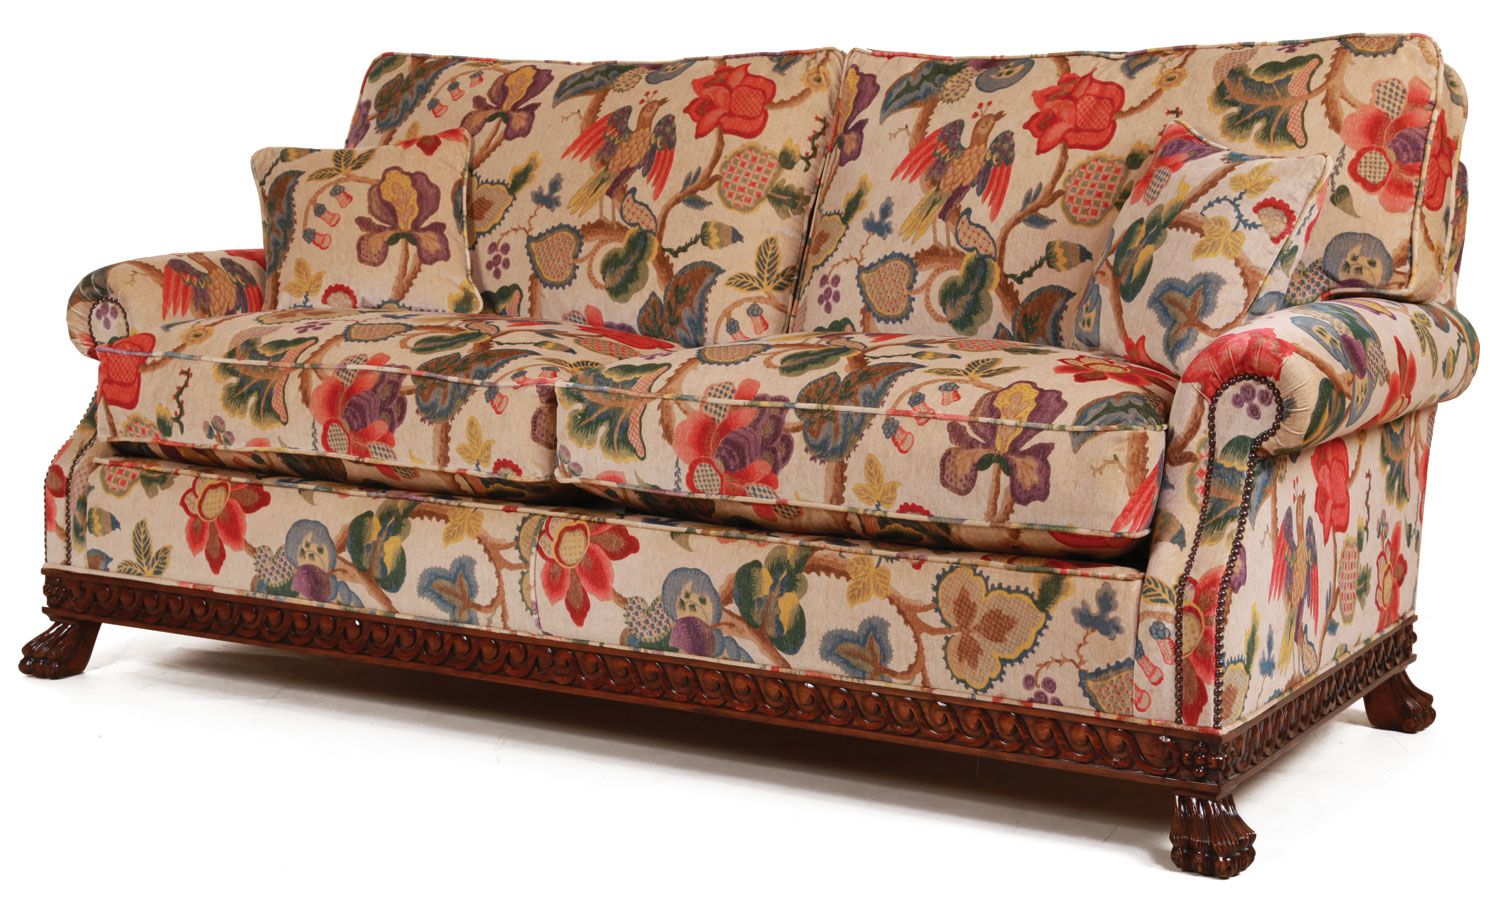 Dartington Sofa In A Floral Print Velvet, Fabric Sofas In Stock From Regarding Sofas In Pattern (View 12 of 20)